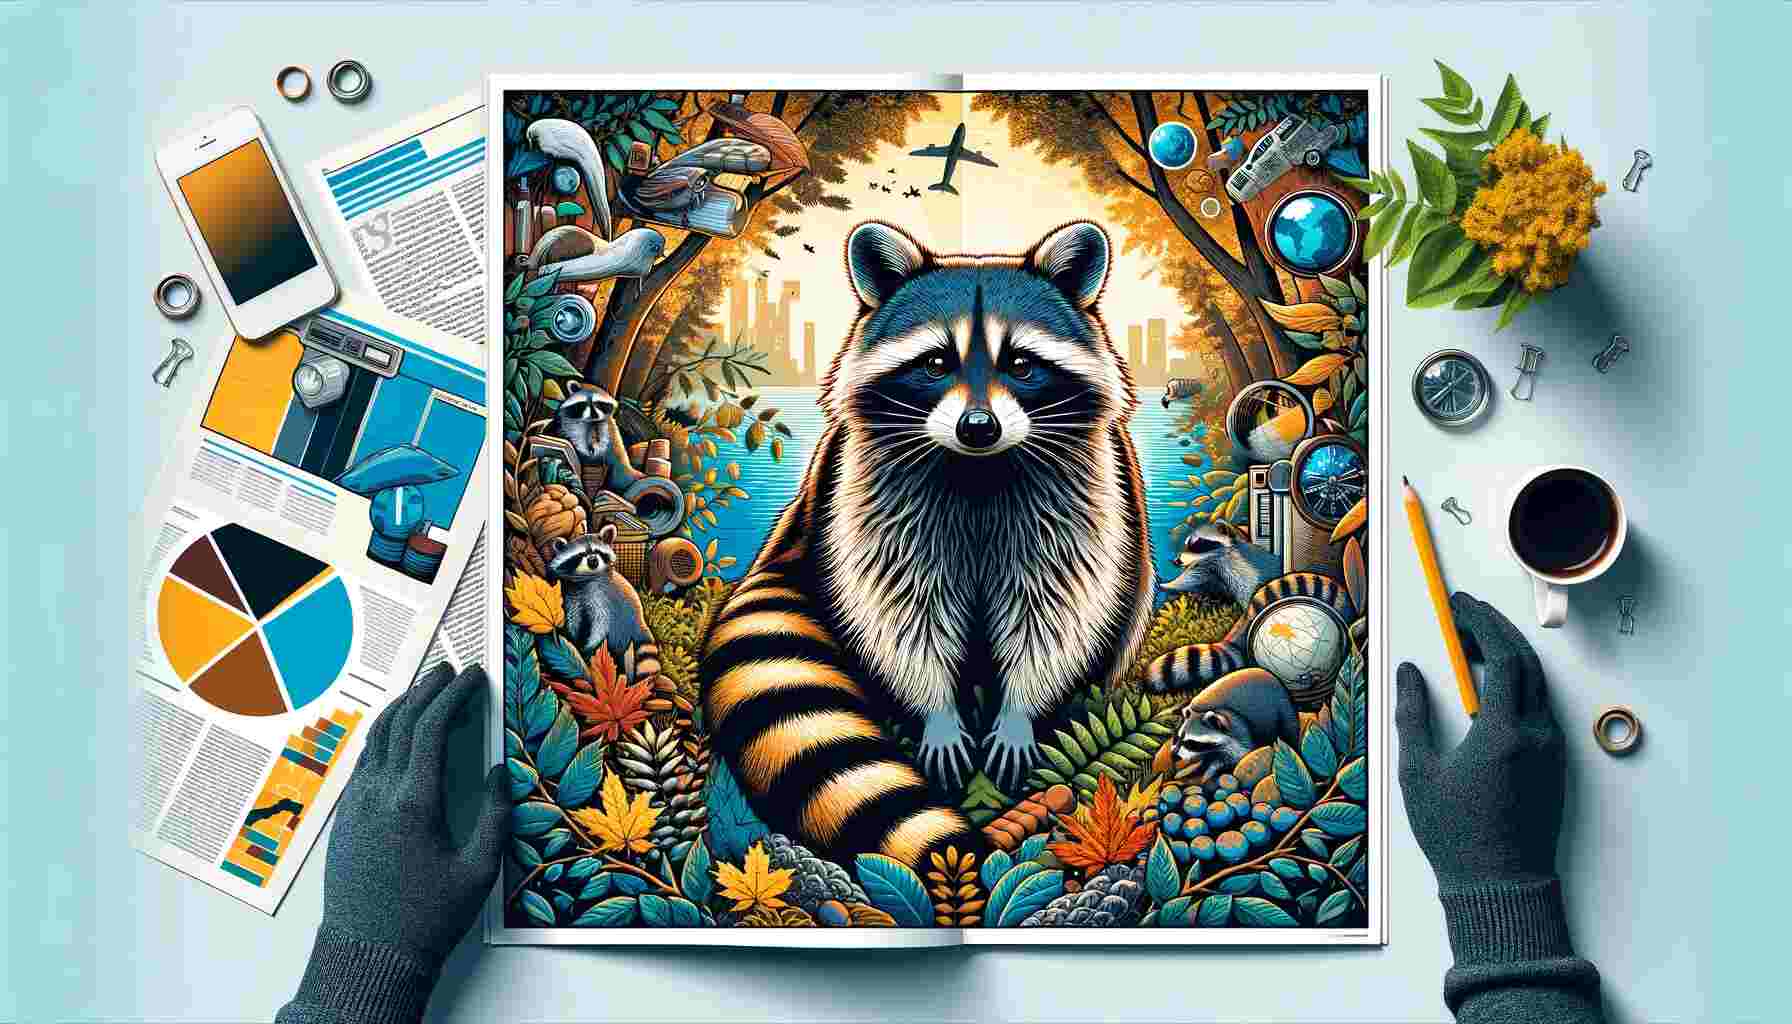 Here is the featured image for thi article about raccoon. It captures the essence of the article, with a raccoon in a prominent position showcasing its distinctive features. The image includes elements representing the raccoon's natural habitat, its role in the ecosystem, and its interactions with humans, effectively encapsulating the adaptability, intelligence, and ecological importance of raccoons.